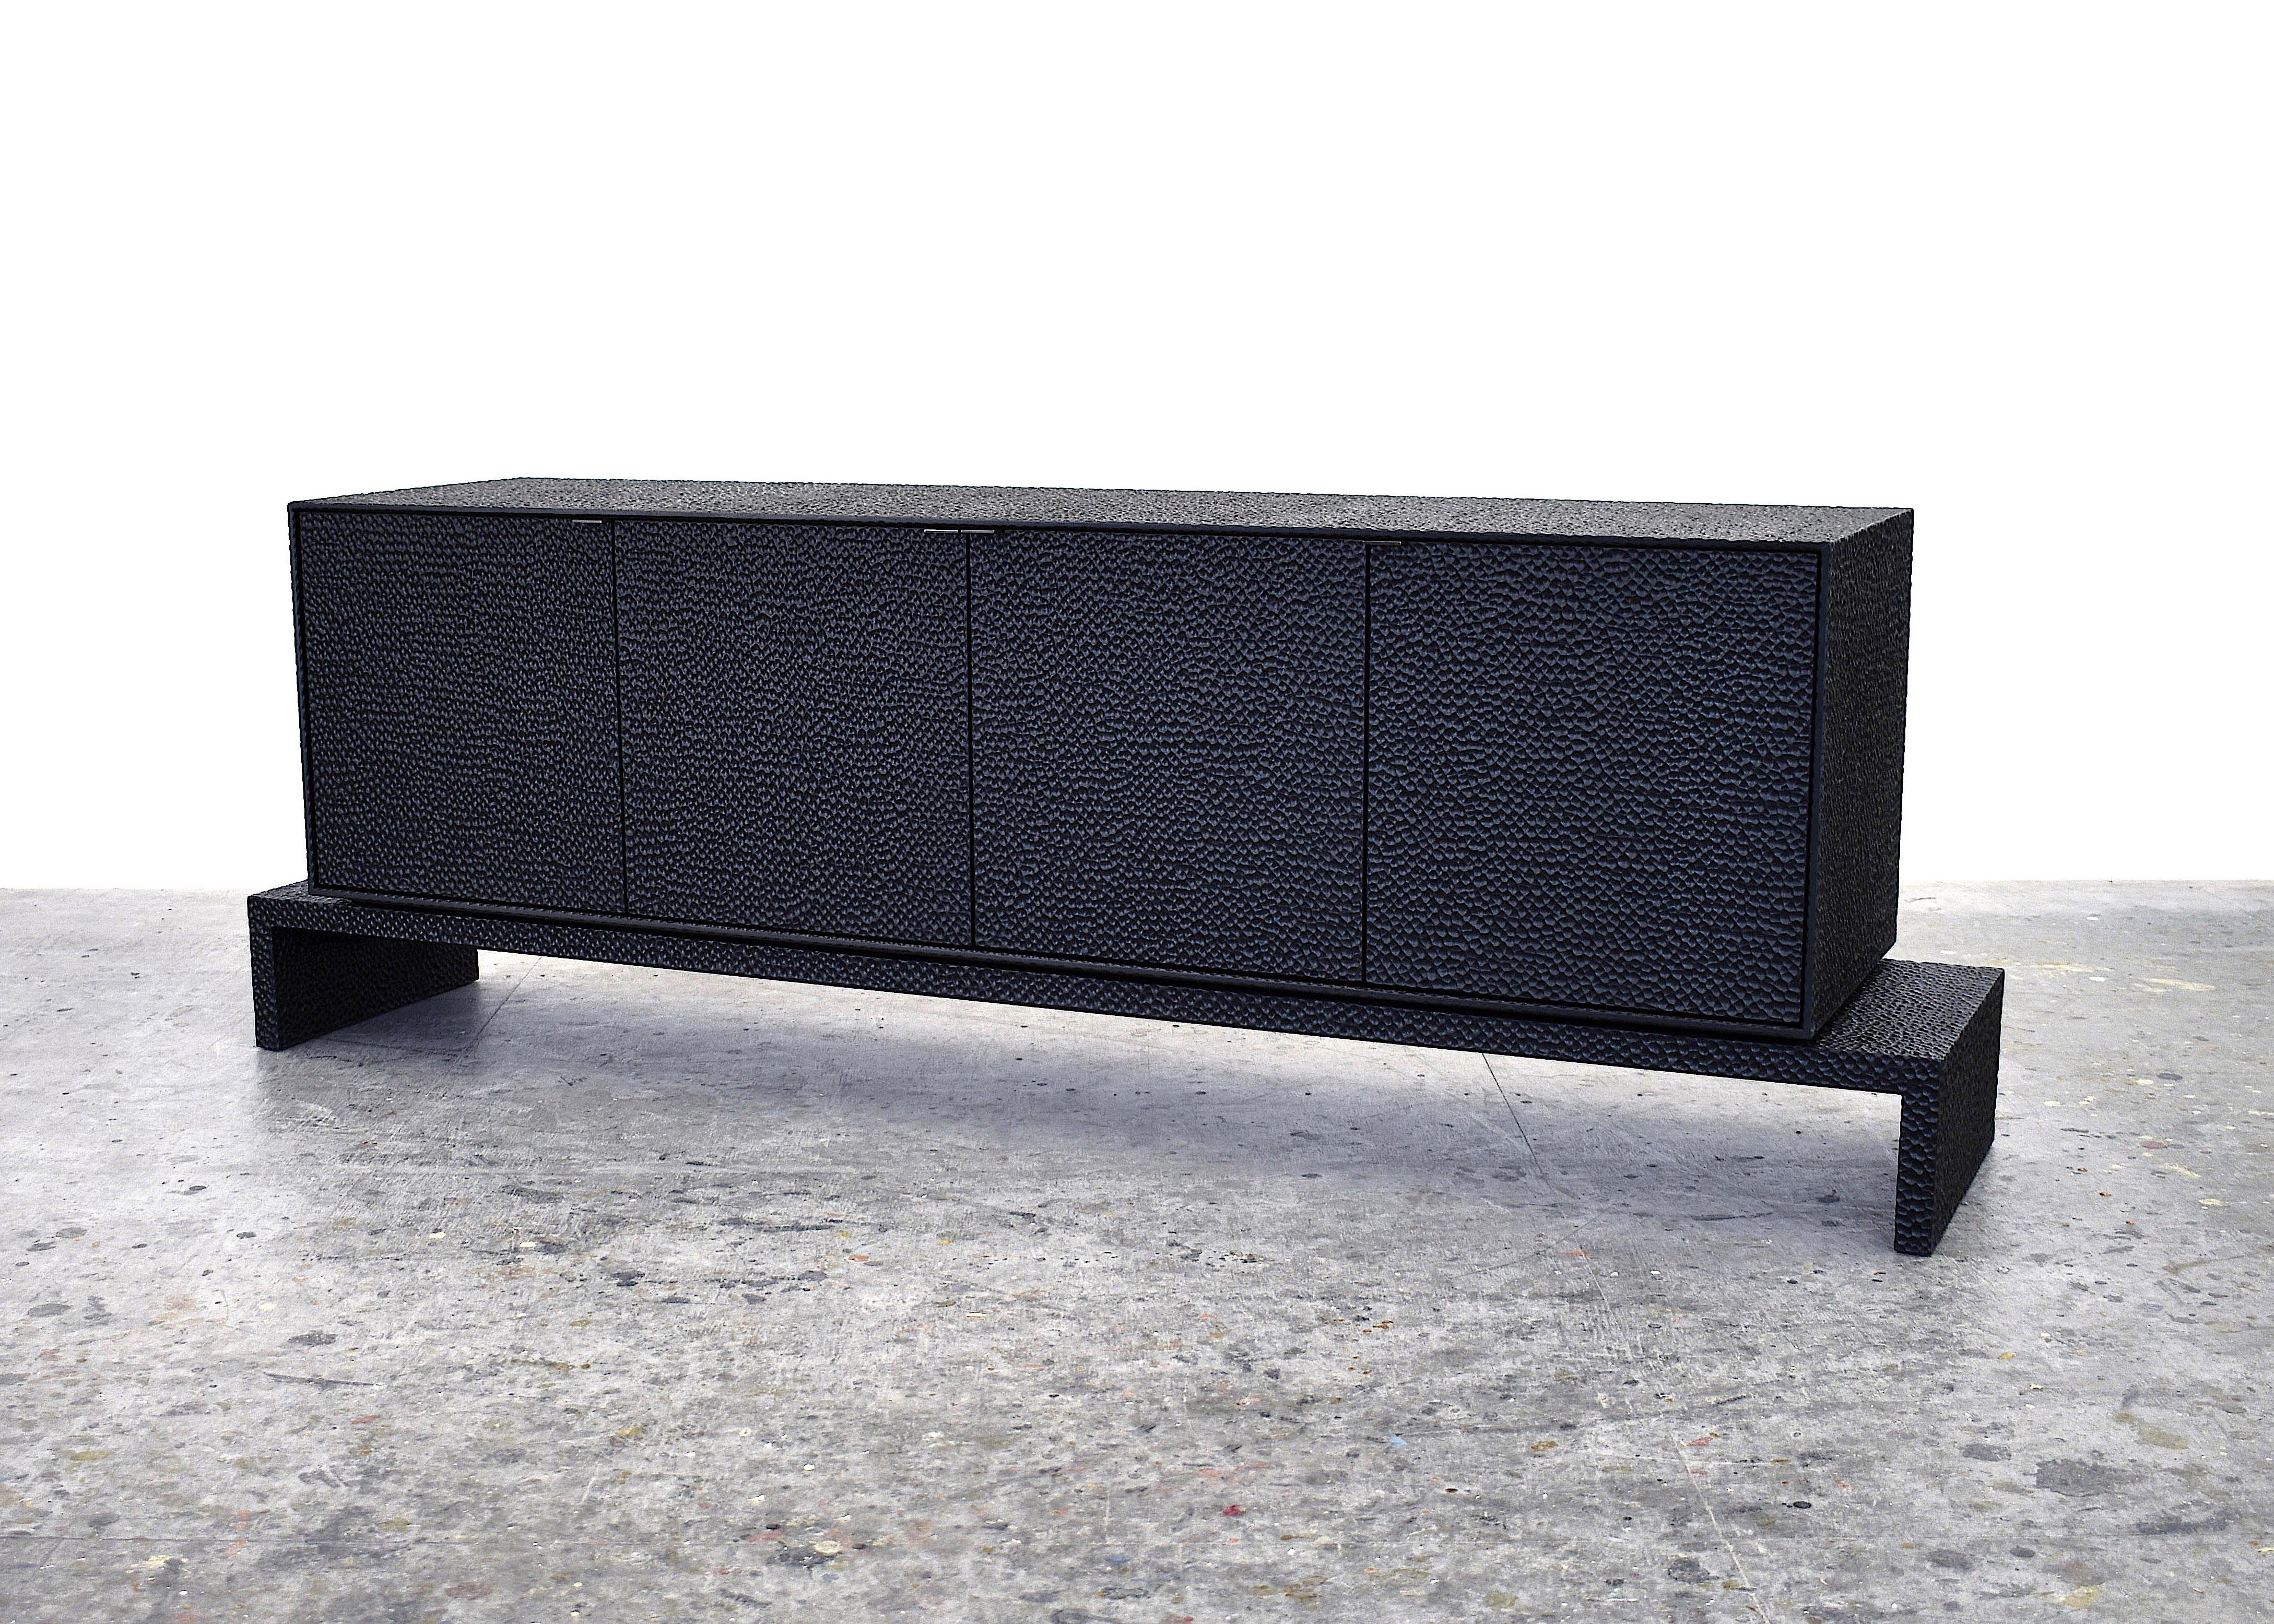 Credenza sculpted by John Eric Byers
Dimensions: 66 x 195.6 x 45.7 cm
Materials: Carved blackened maple, brass

All works are individually handmade to order.

John Eric Byers creates geometrically inspired pieces that are minimal, emotional,